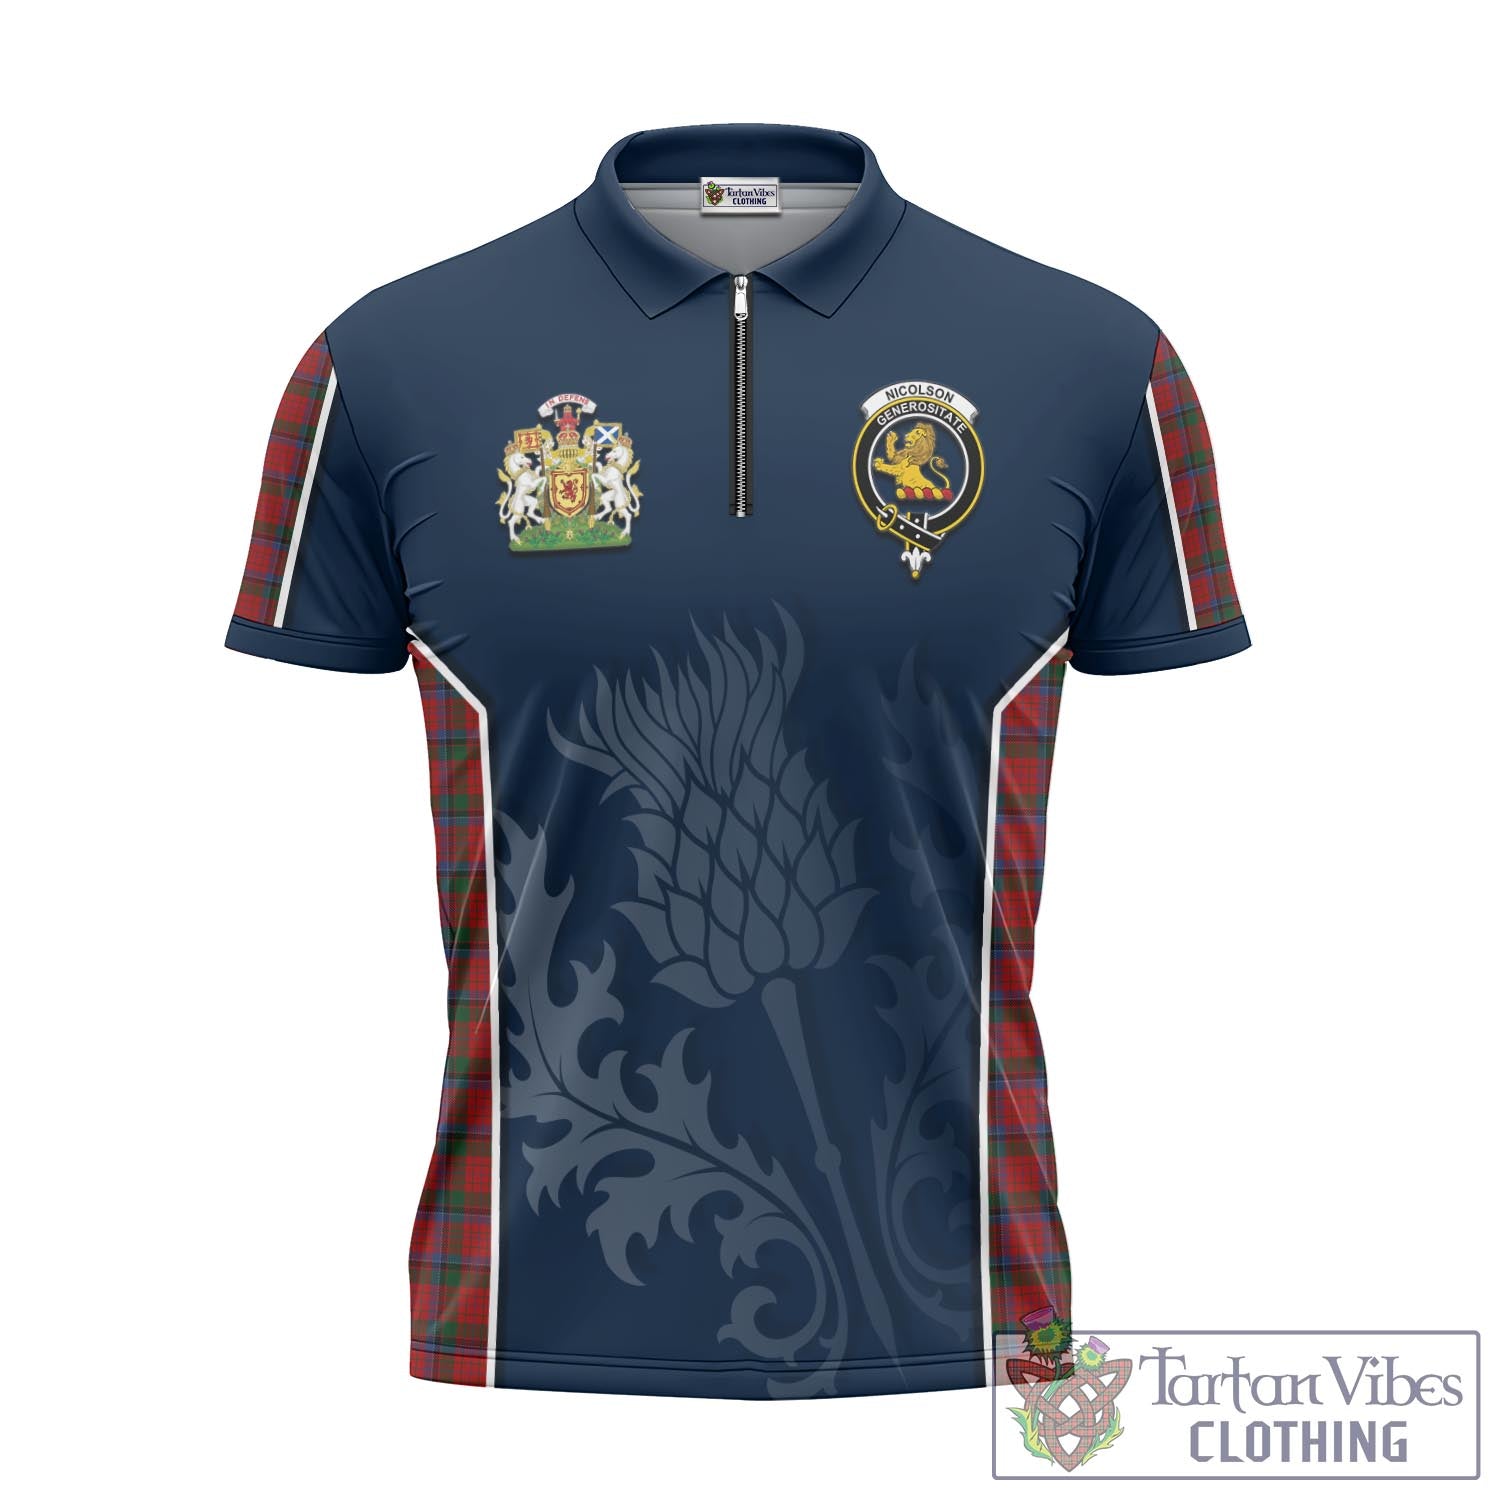 Tartan Vibes Clothing Nicolson Tartan Zipper Polo Shirt with Family Crest and Scottish Thistle Vibes Sport Style